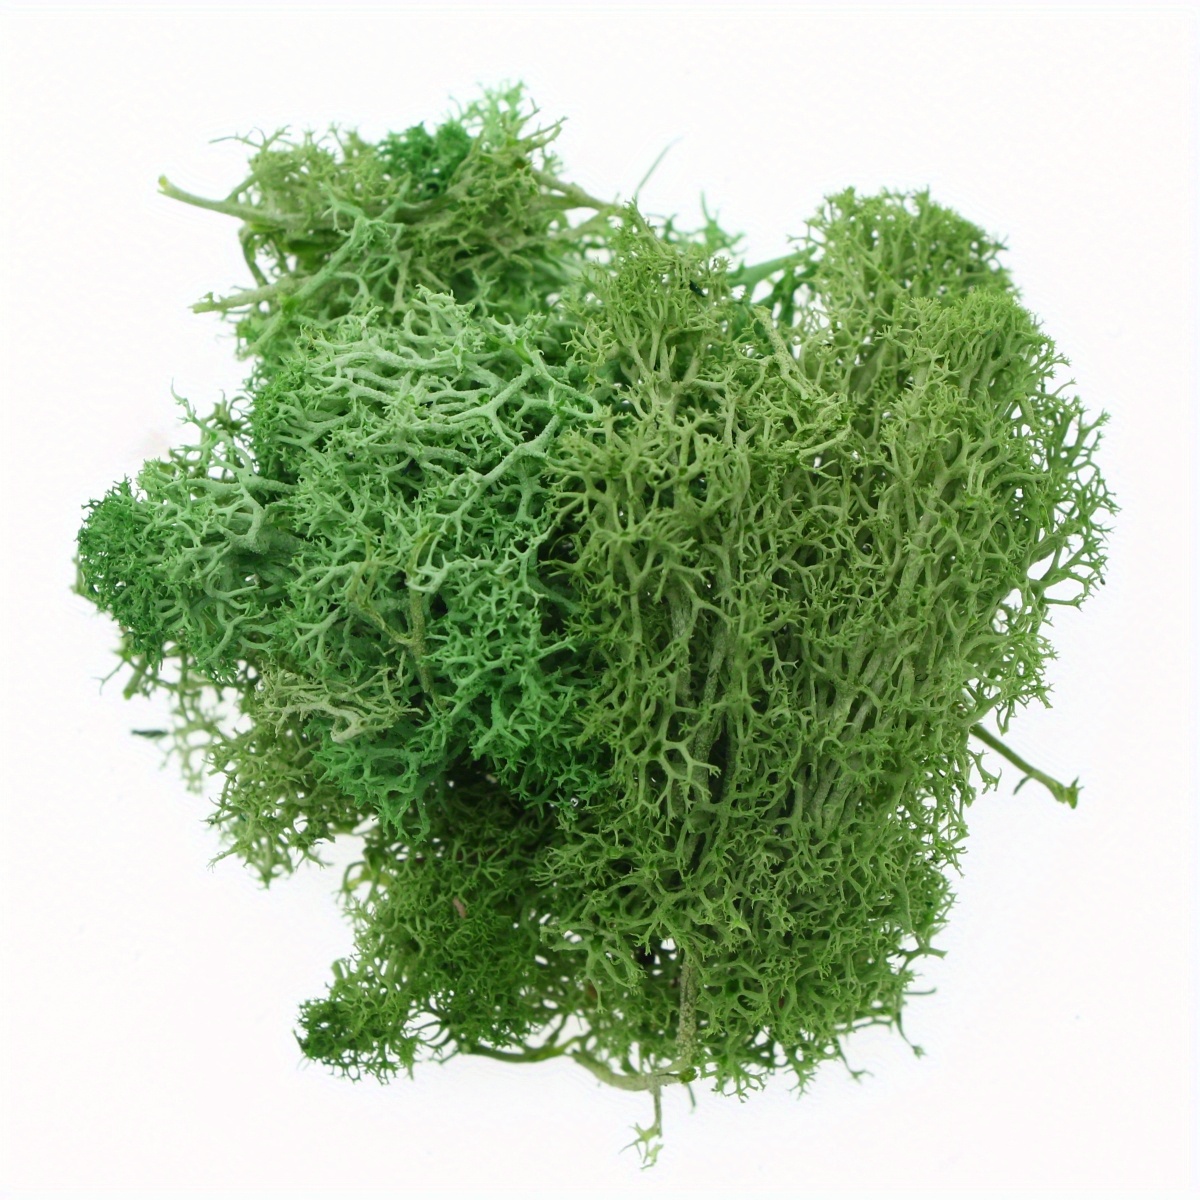 Yalulu 60g Moss Preserved Floral Moss for Fairy Gardens